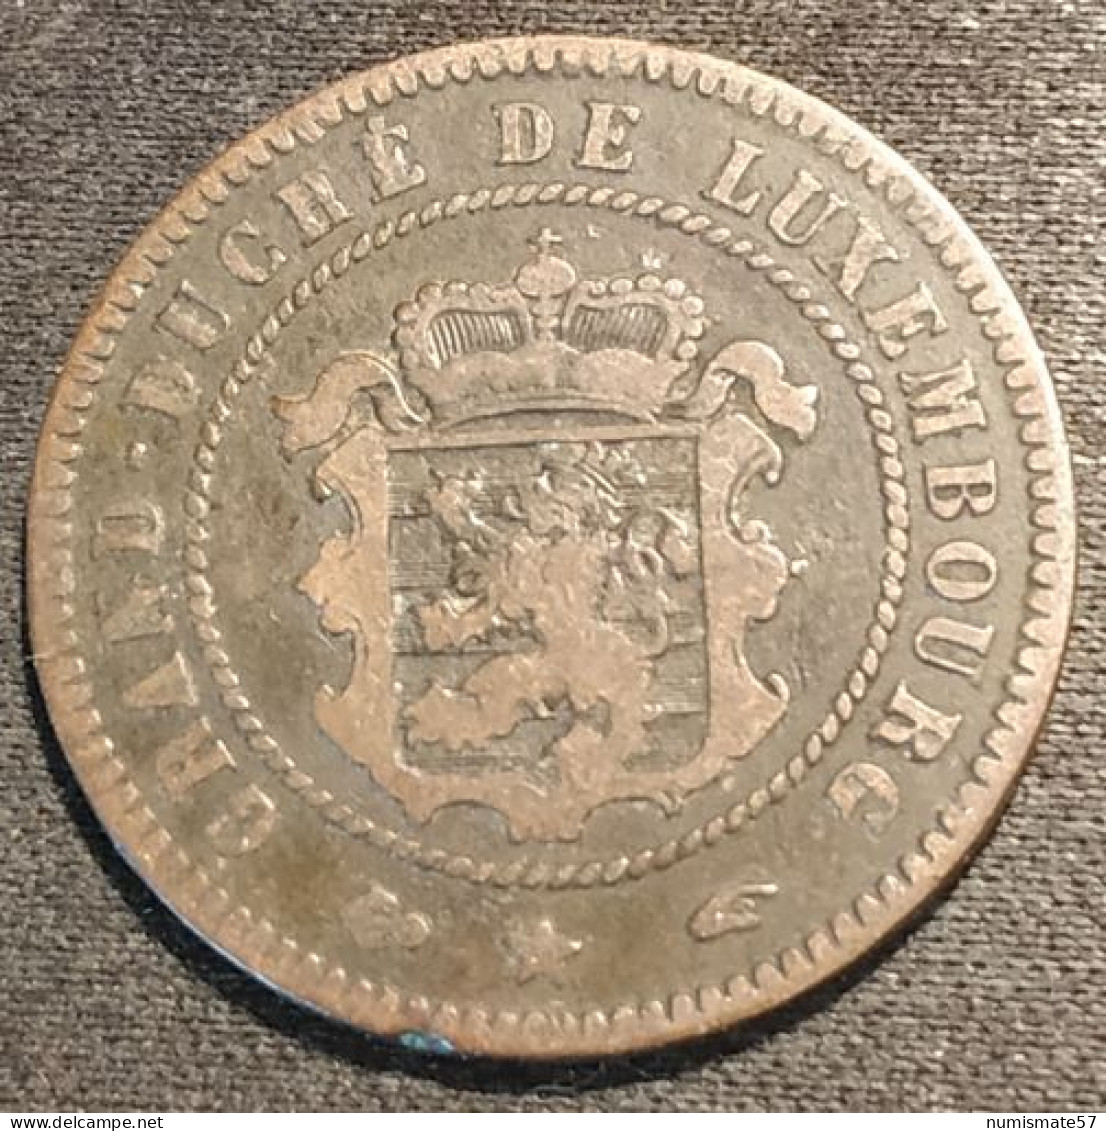 LUXEMBOURG - 5 CENTIMES 1855 - Guillaume III - KM 22 - Luxemburg